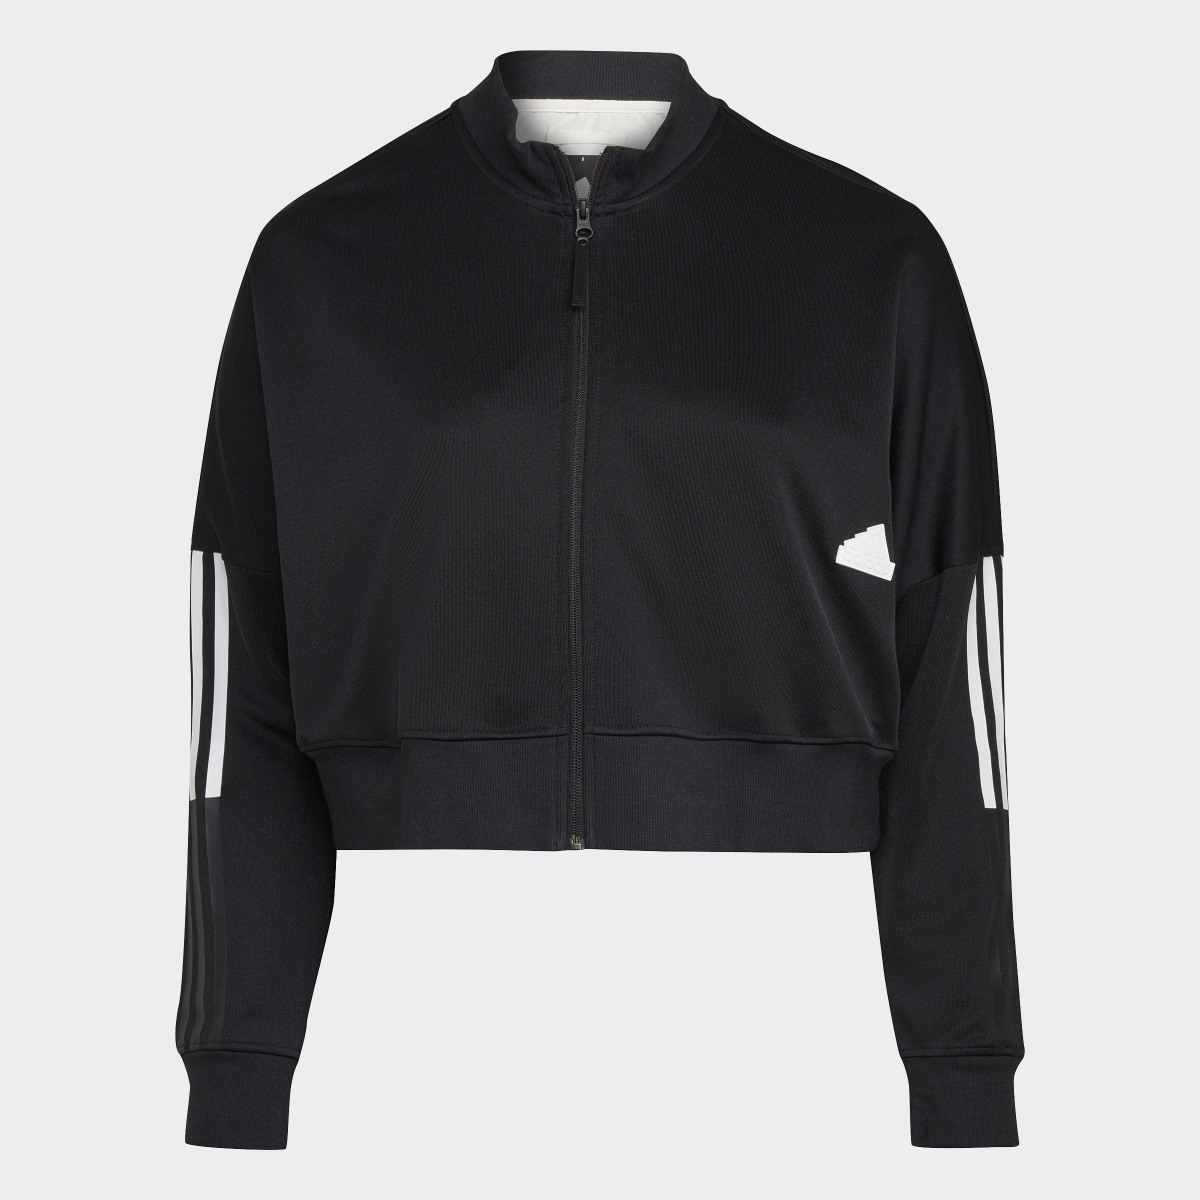 Adidas Cropped Track Top (Plus Size). 6